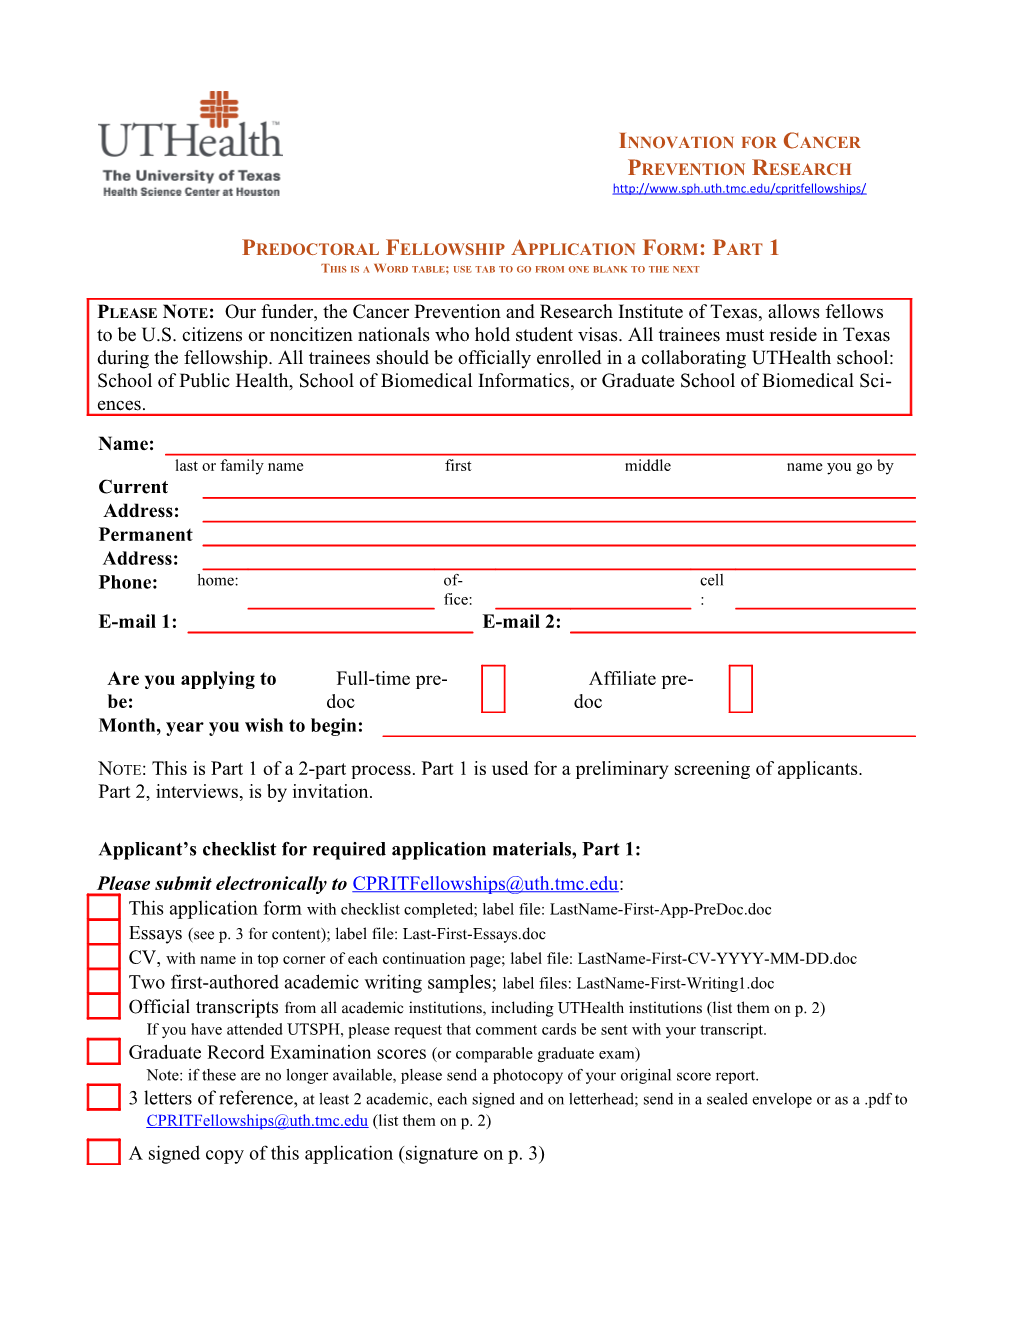 Predoctoral Fellowship Application Form:Part 1